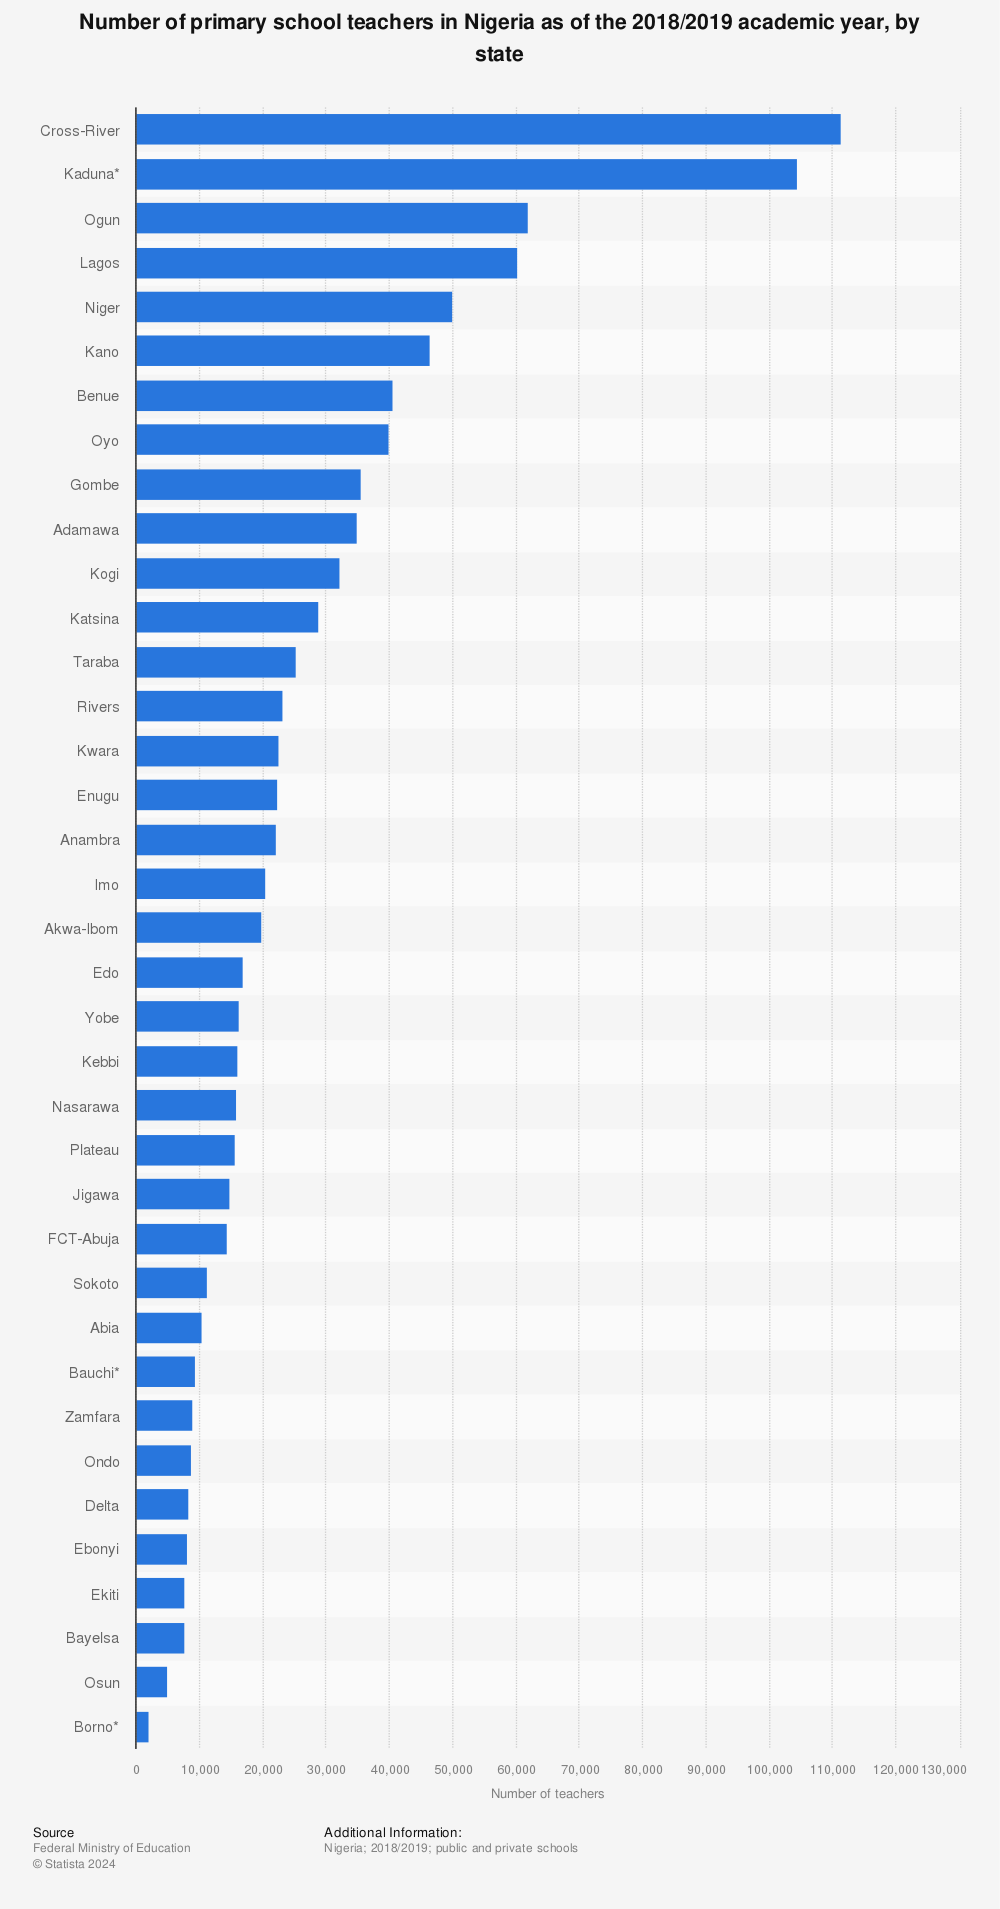 Statistic: Number of primary school teachers in Nigeria as of the 2018/2019 academic year, by state | Statista